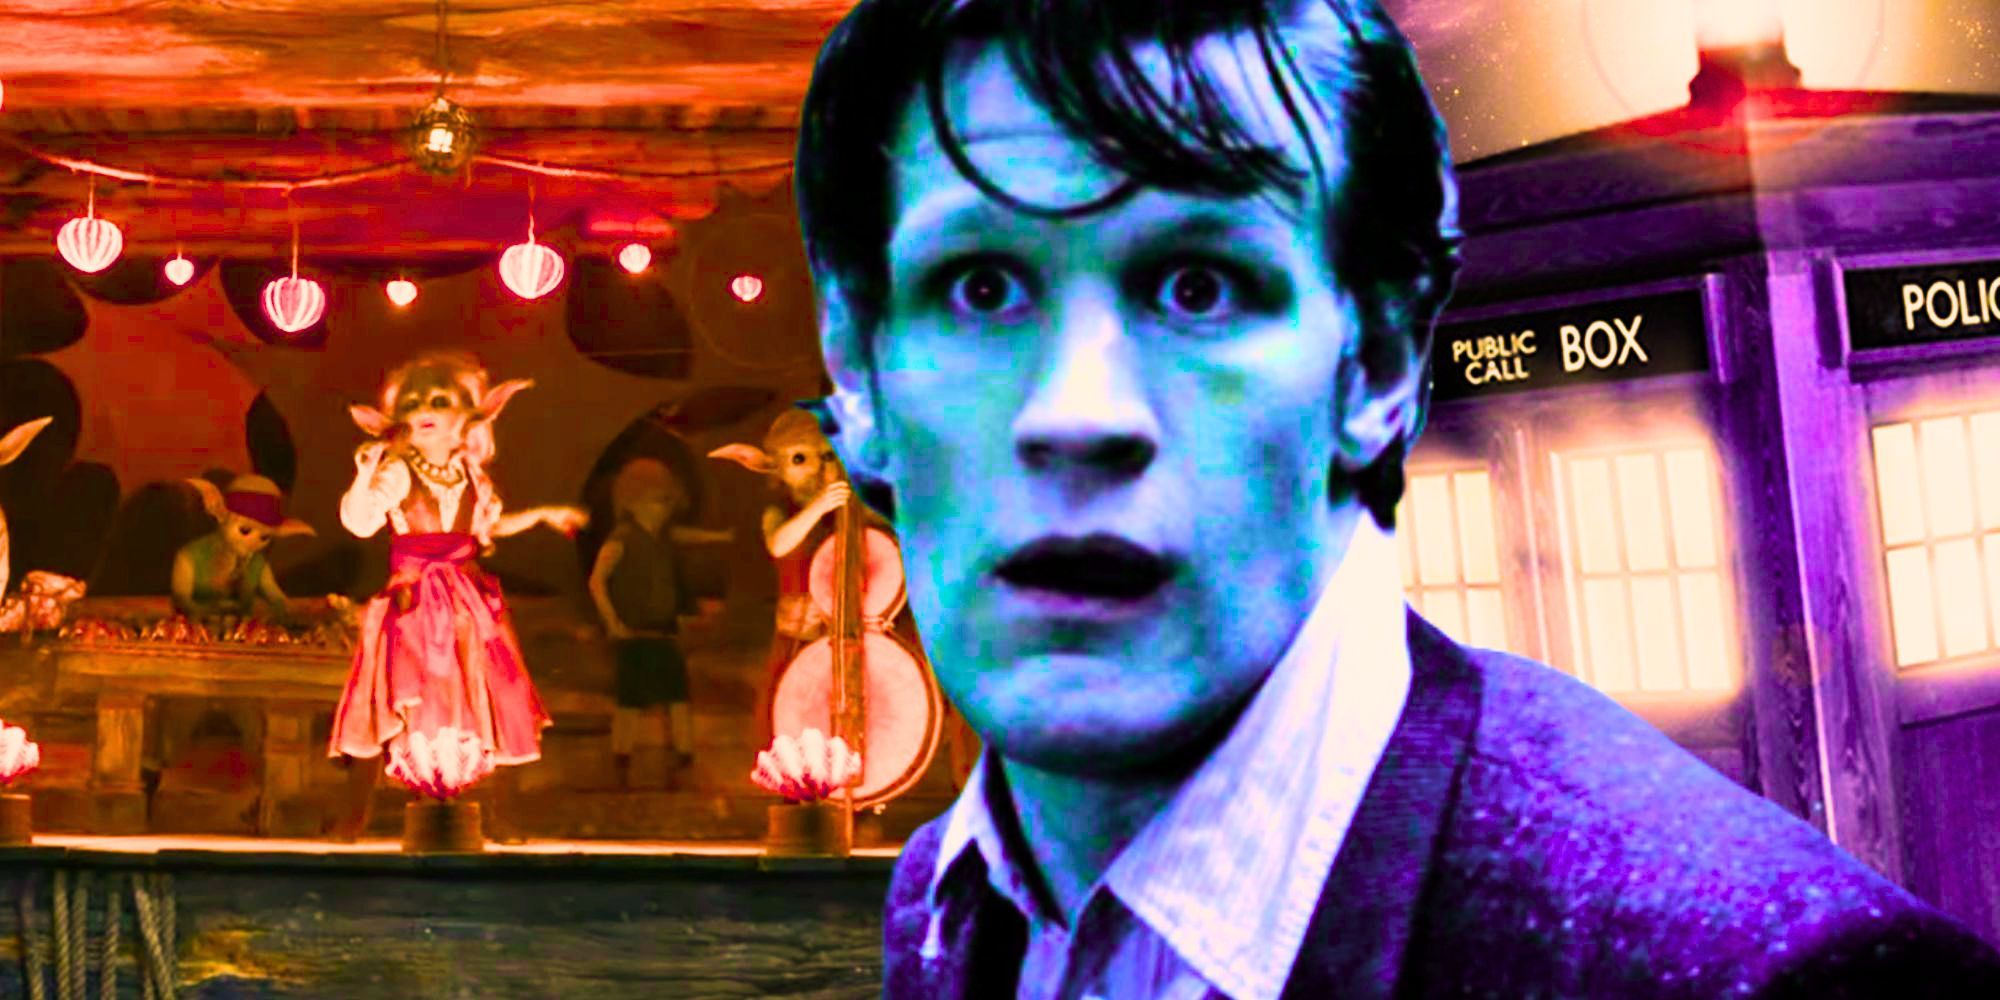 Matt Smith's Eleventh Doctor looking scared against a blended backdrop of Doctor Who's goblins and the TARDIS